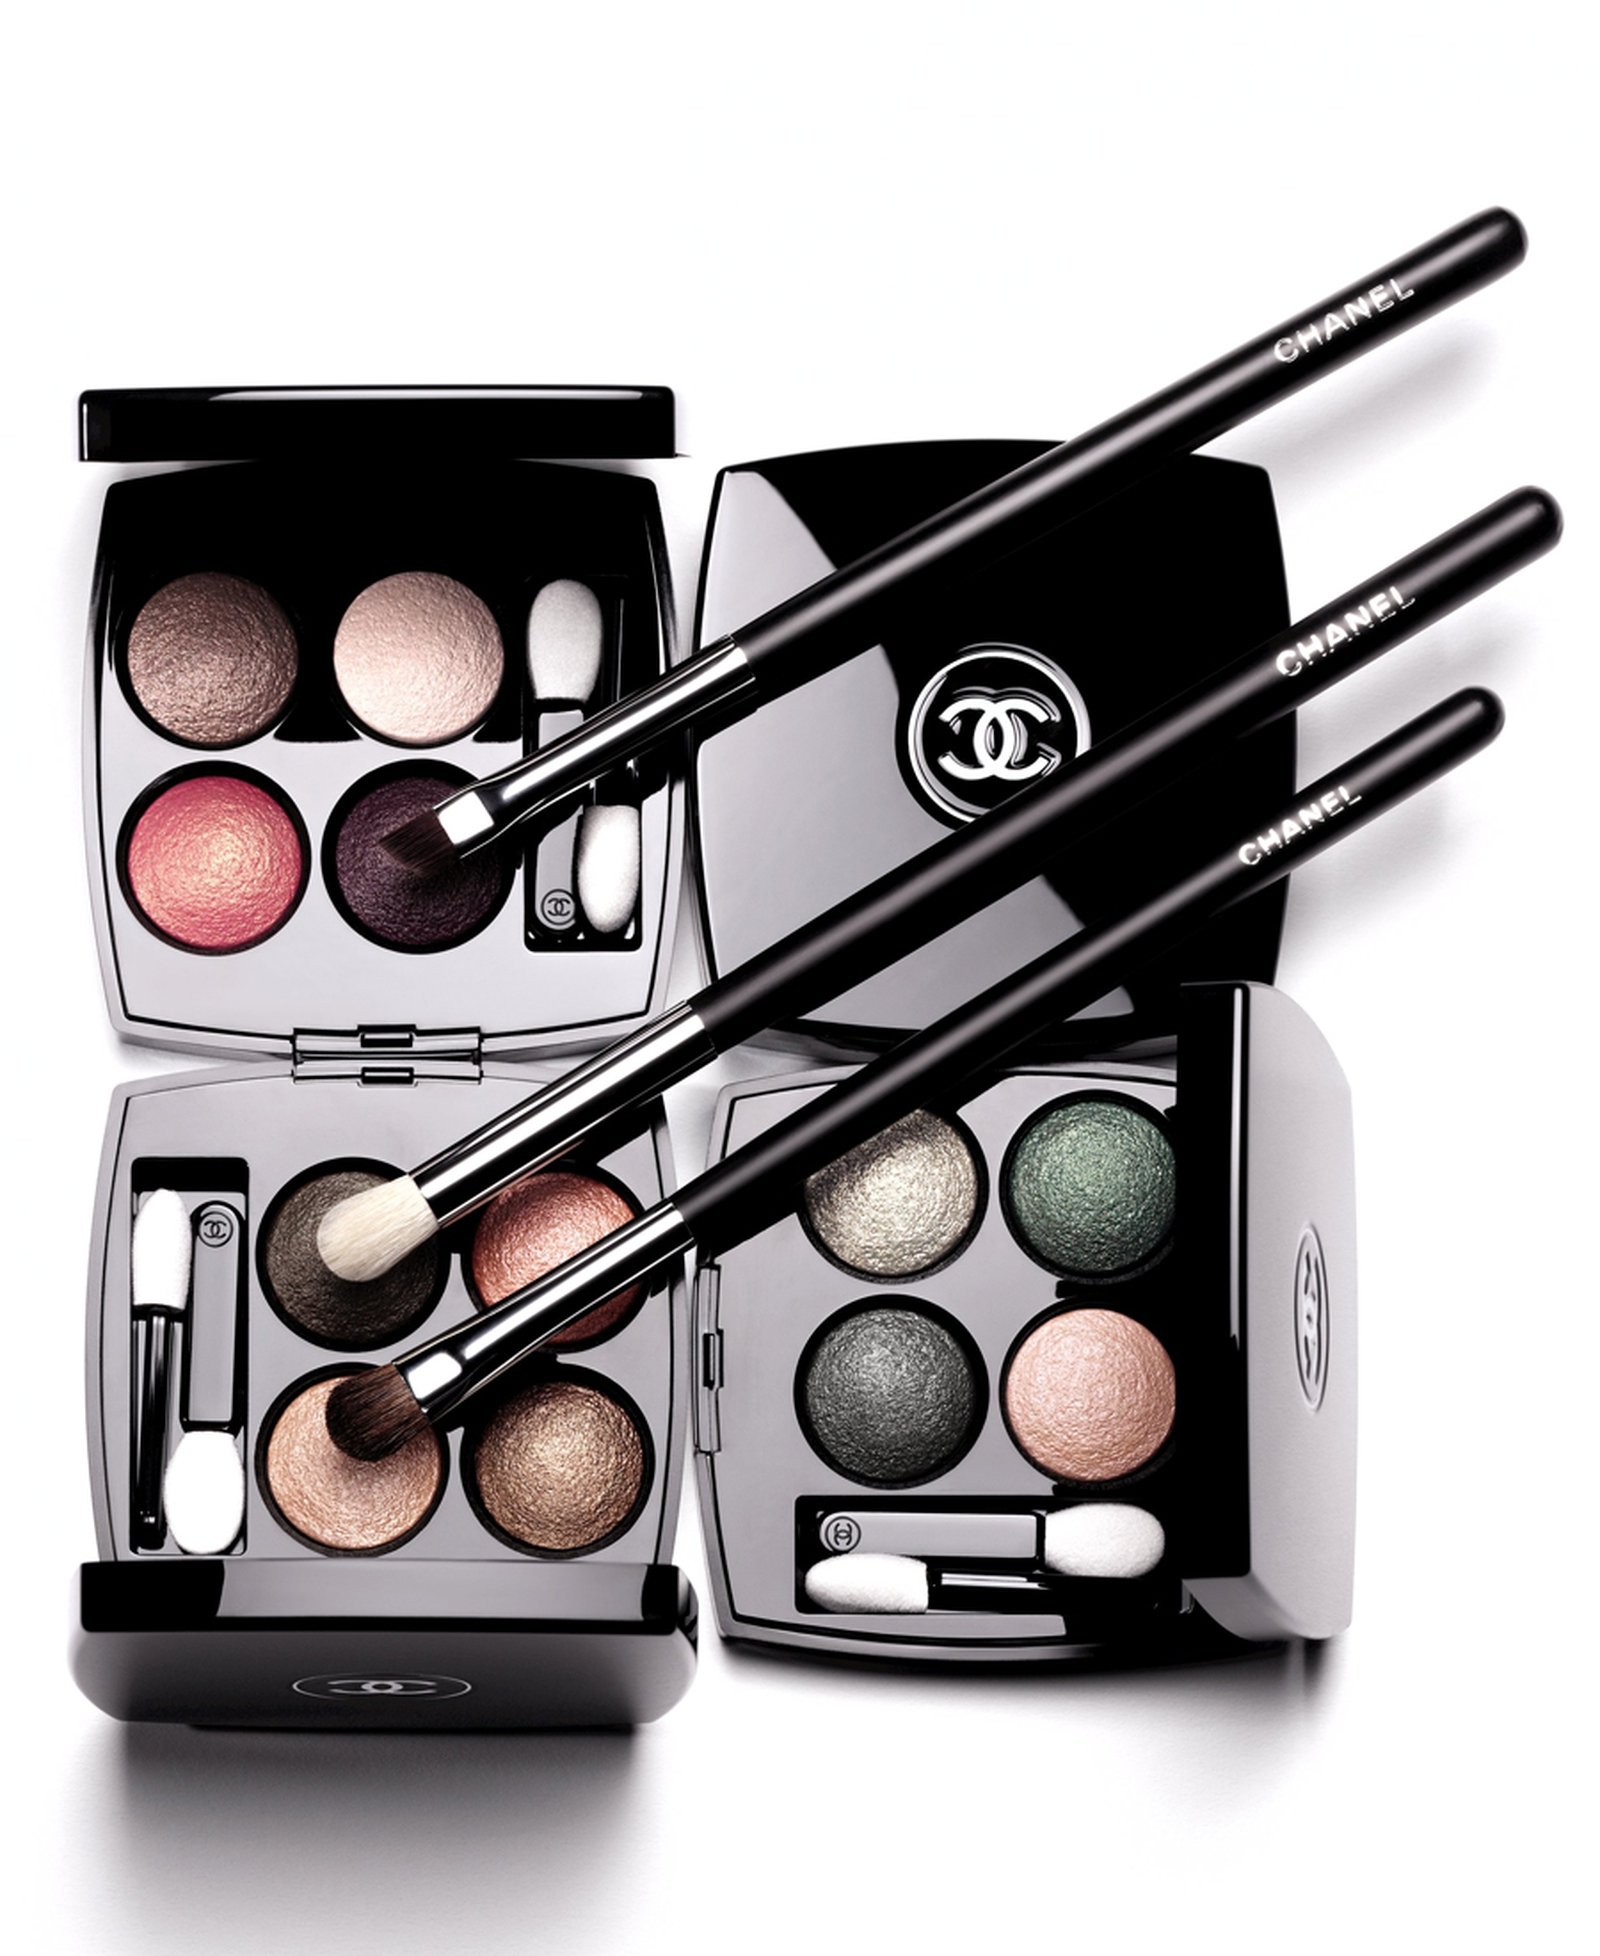 Chanel Les 4 Ombres Collection 2014